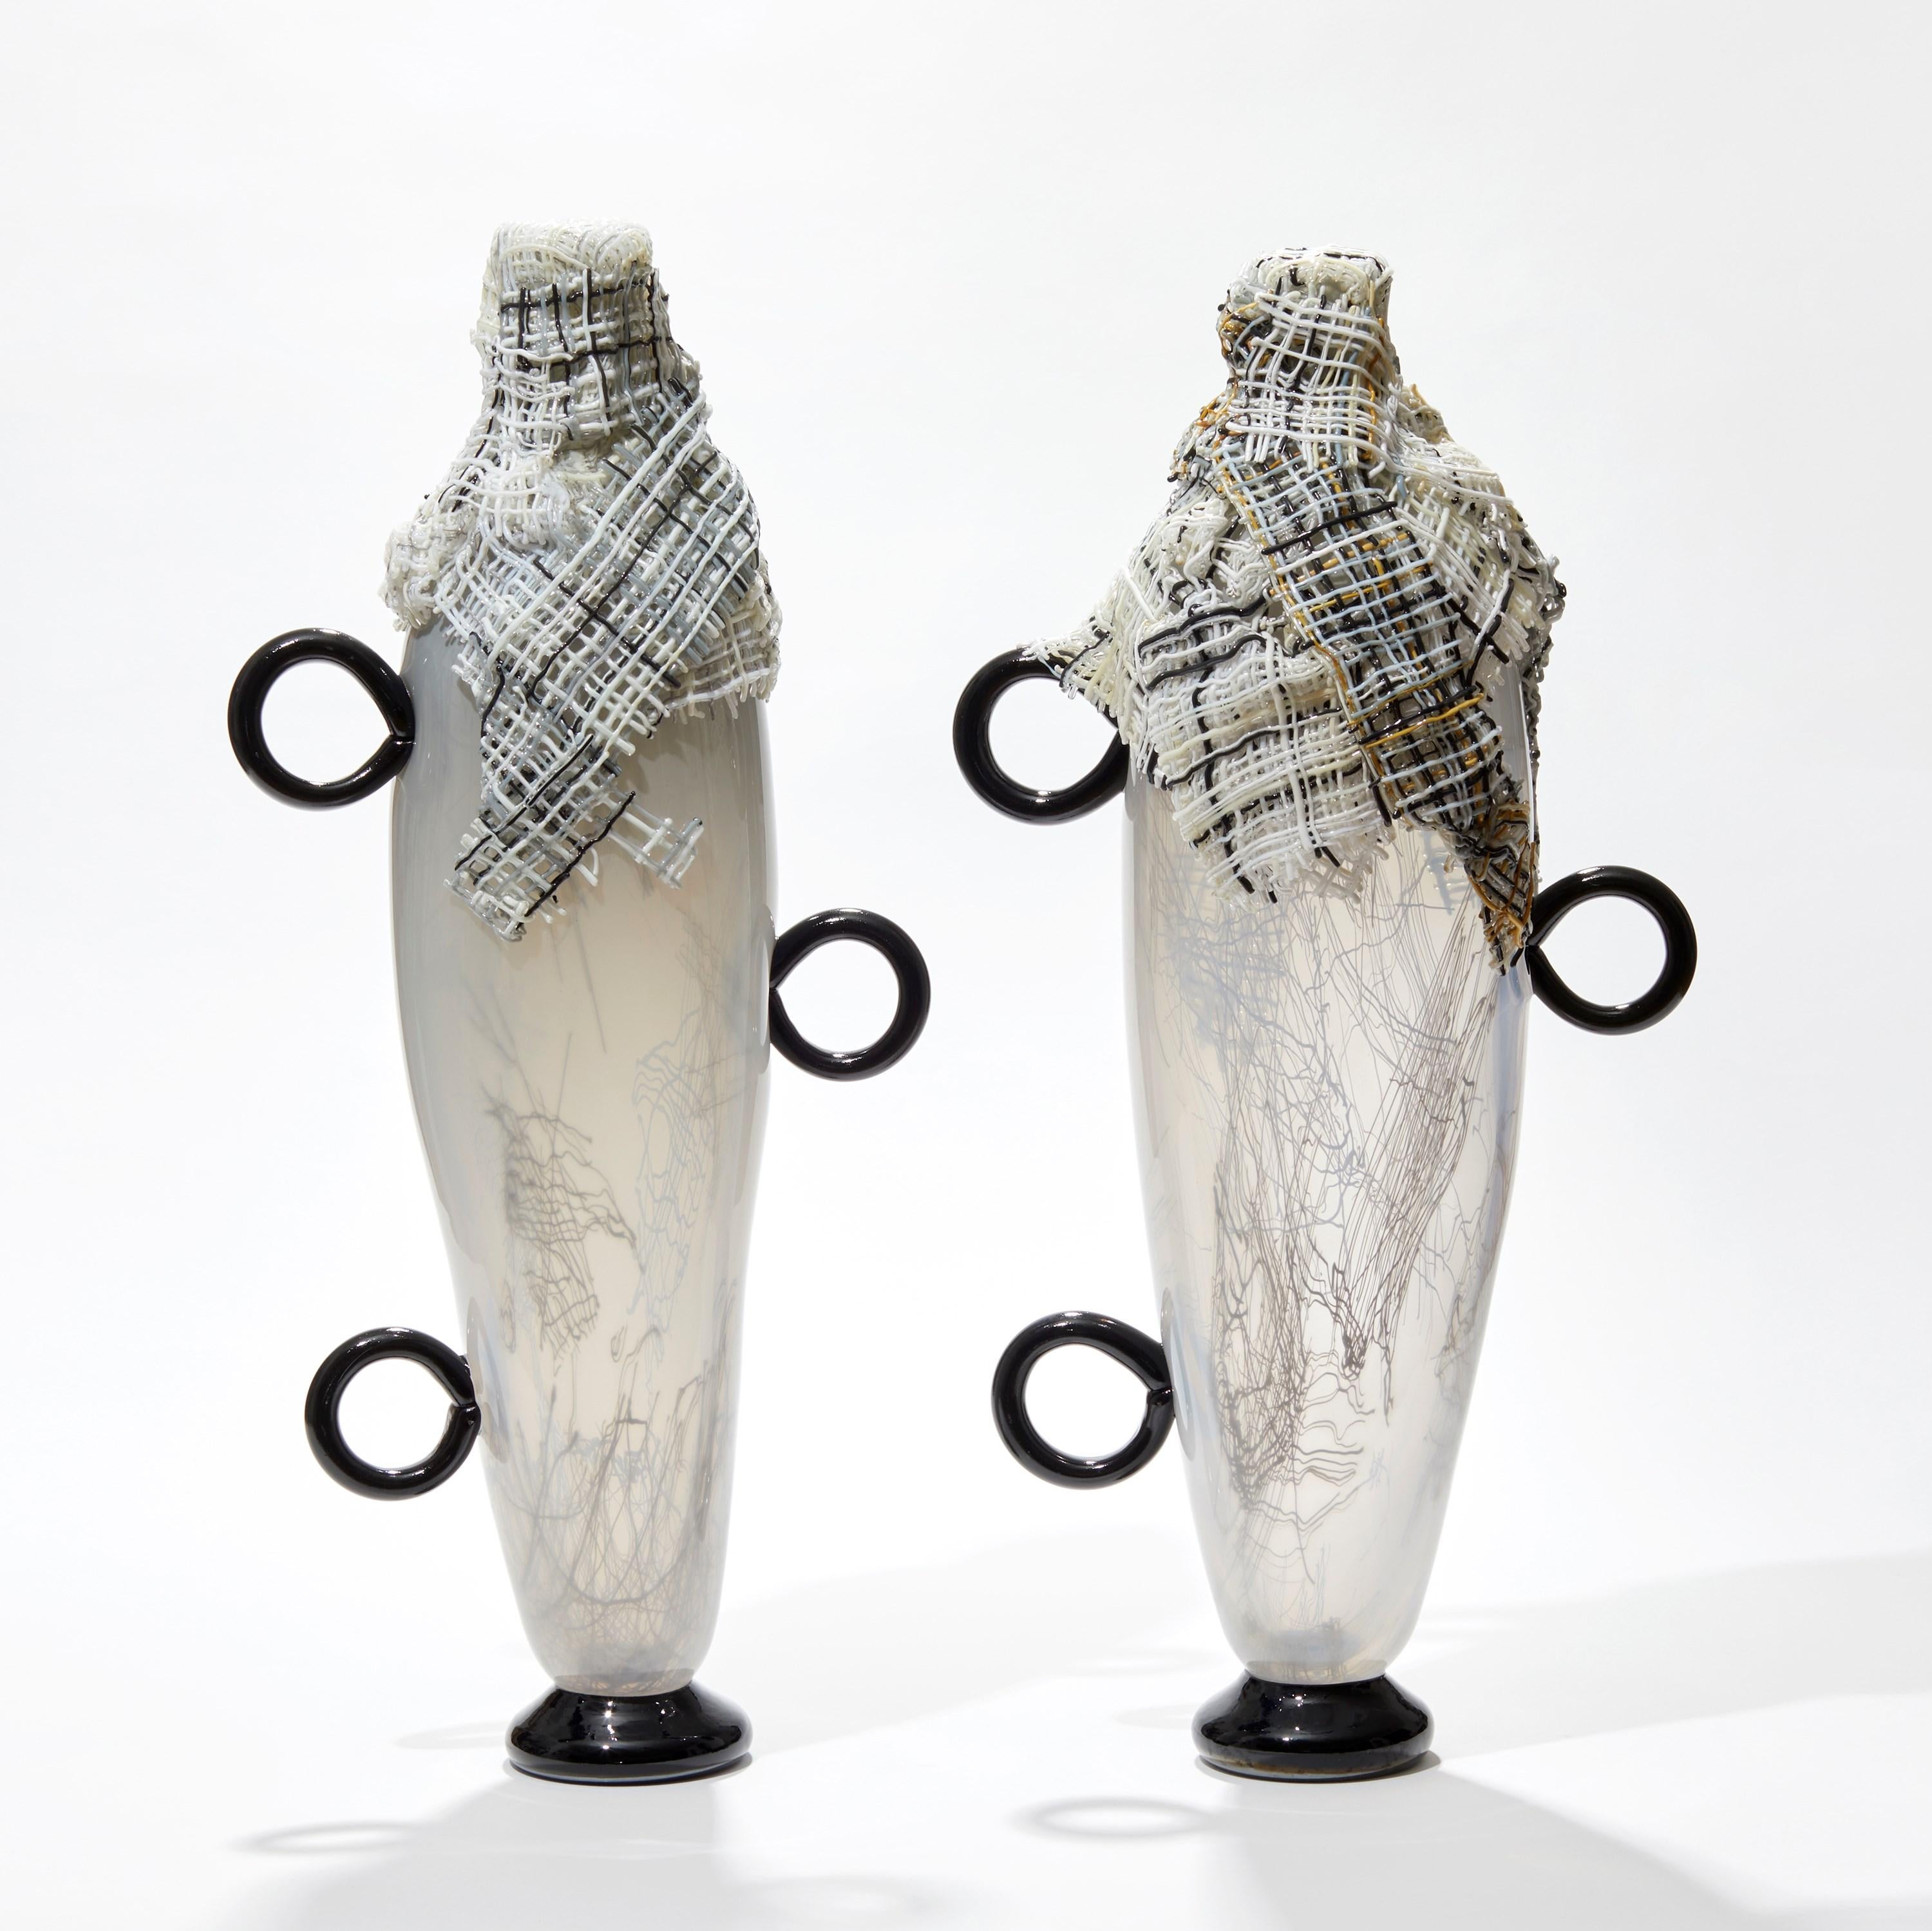 Only Hope Remains II, a monochrome glass standing sculpture by Cathryn Shilling For Sale 1